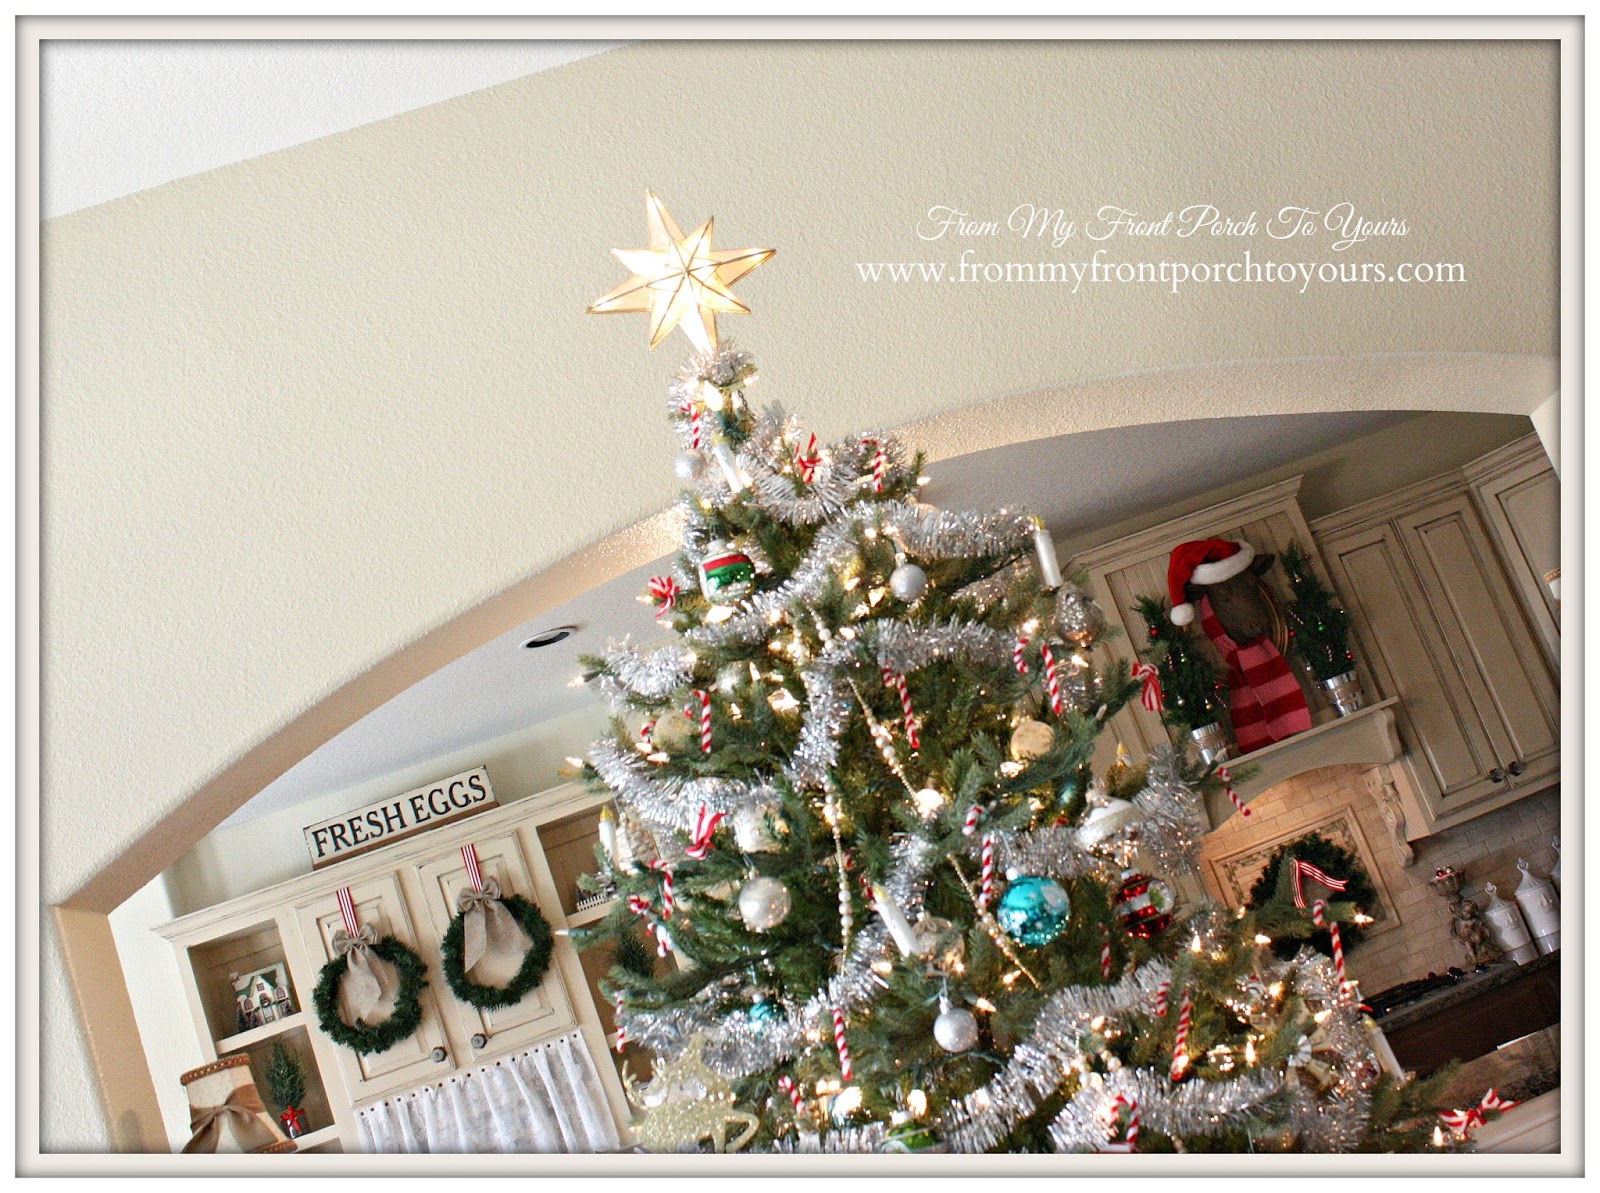 Christmas Tree-Farmhouse Vintage Christmas Living Room- From My Front Porch To Yours